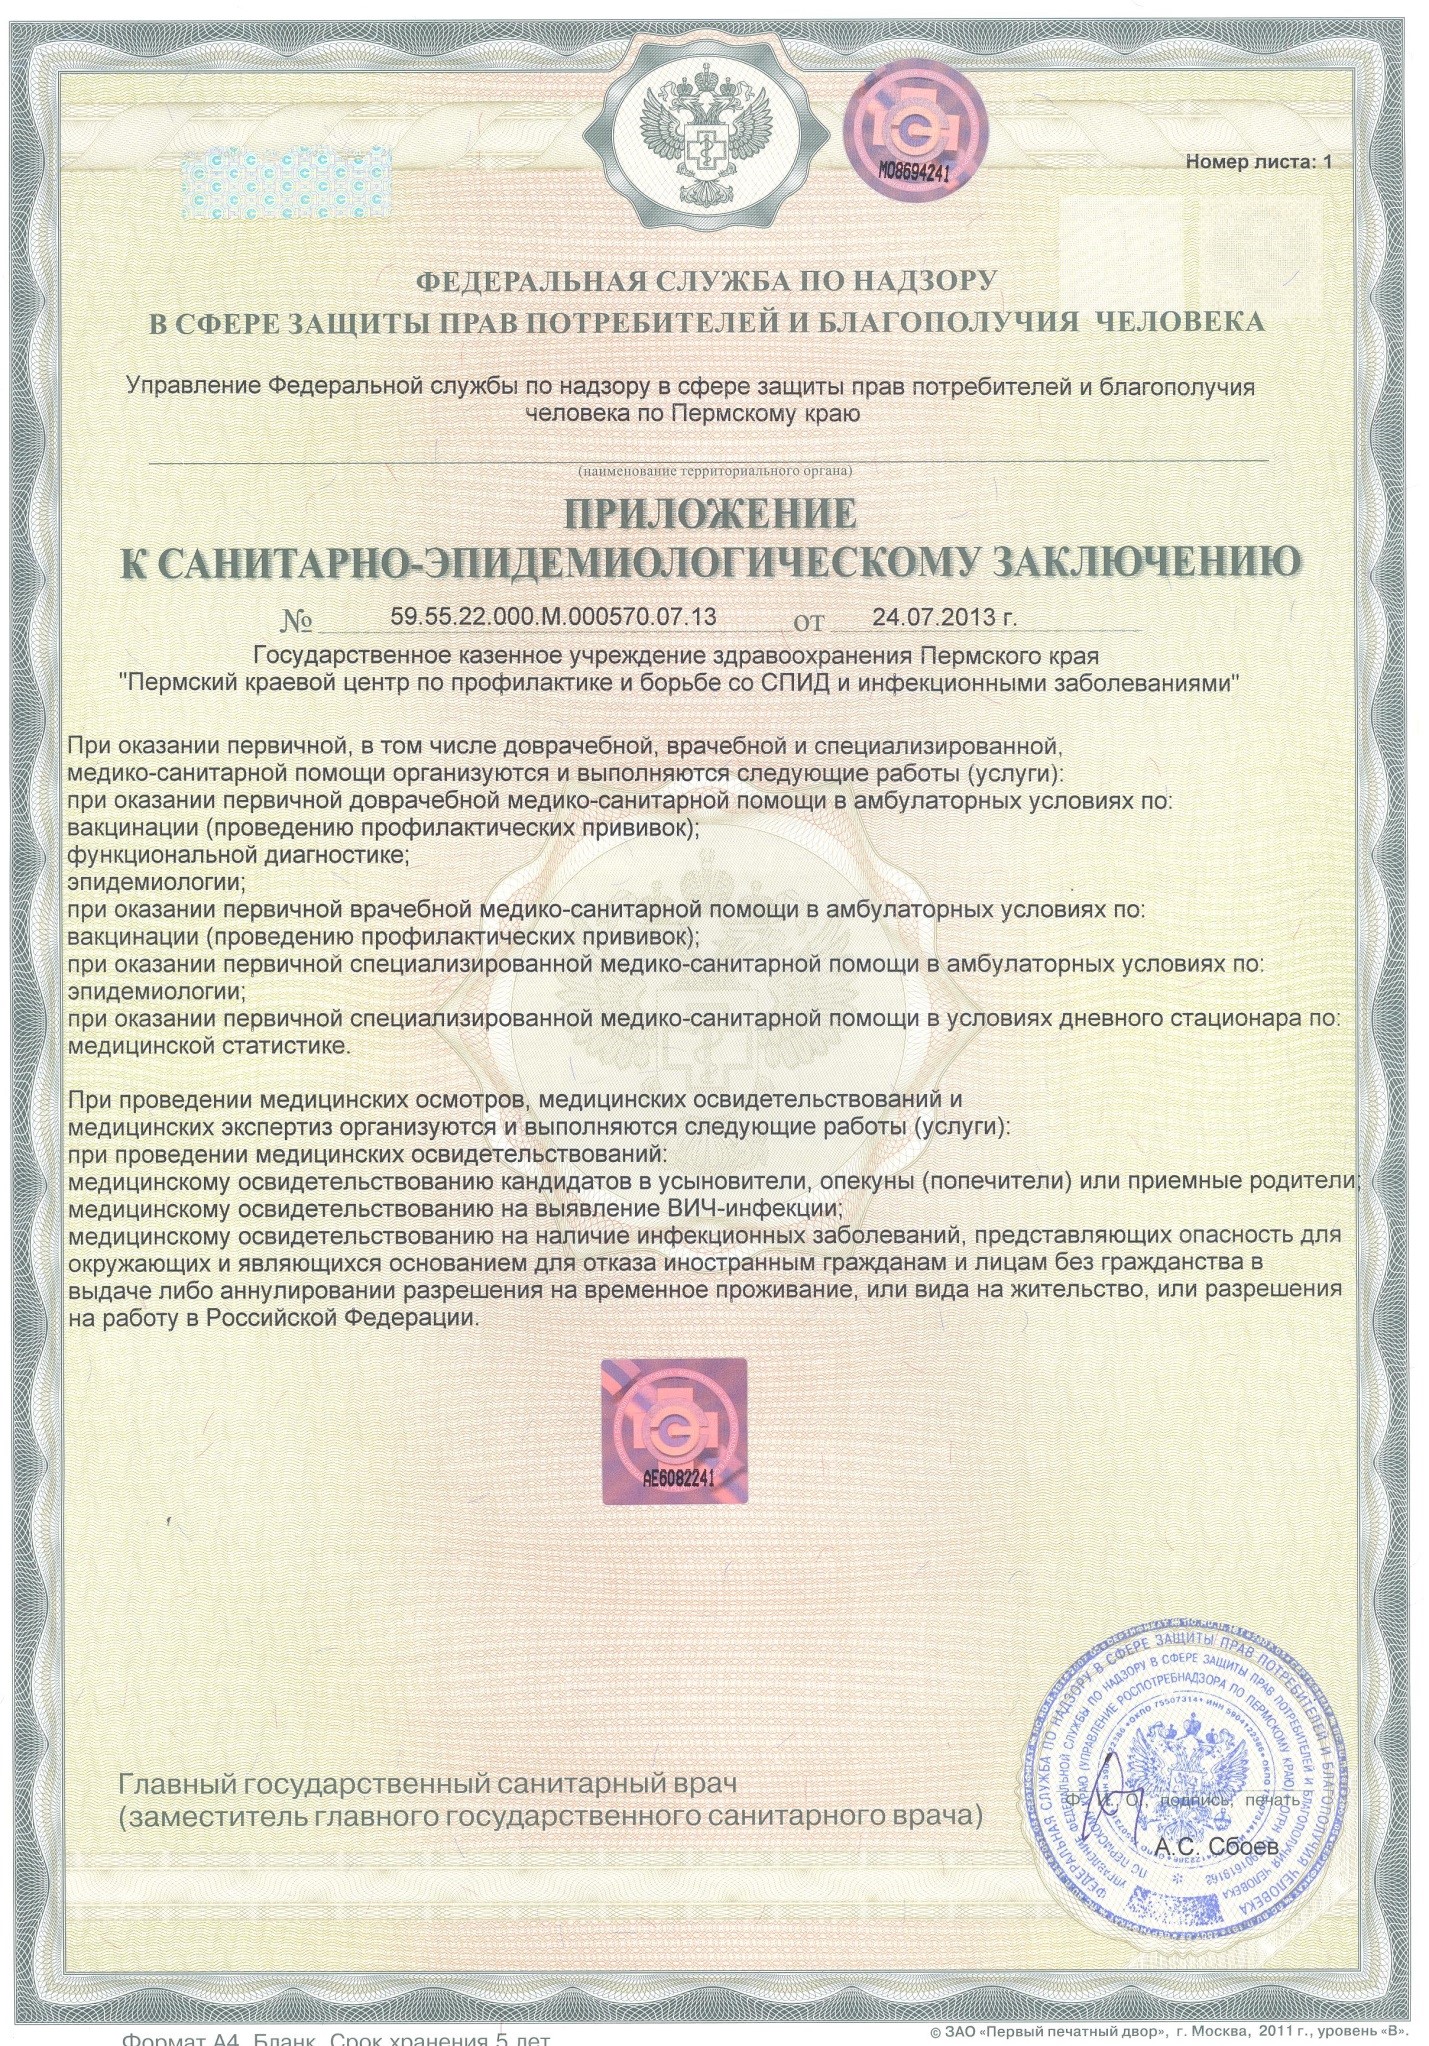 Sanitary-epidemiological certificate2